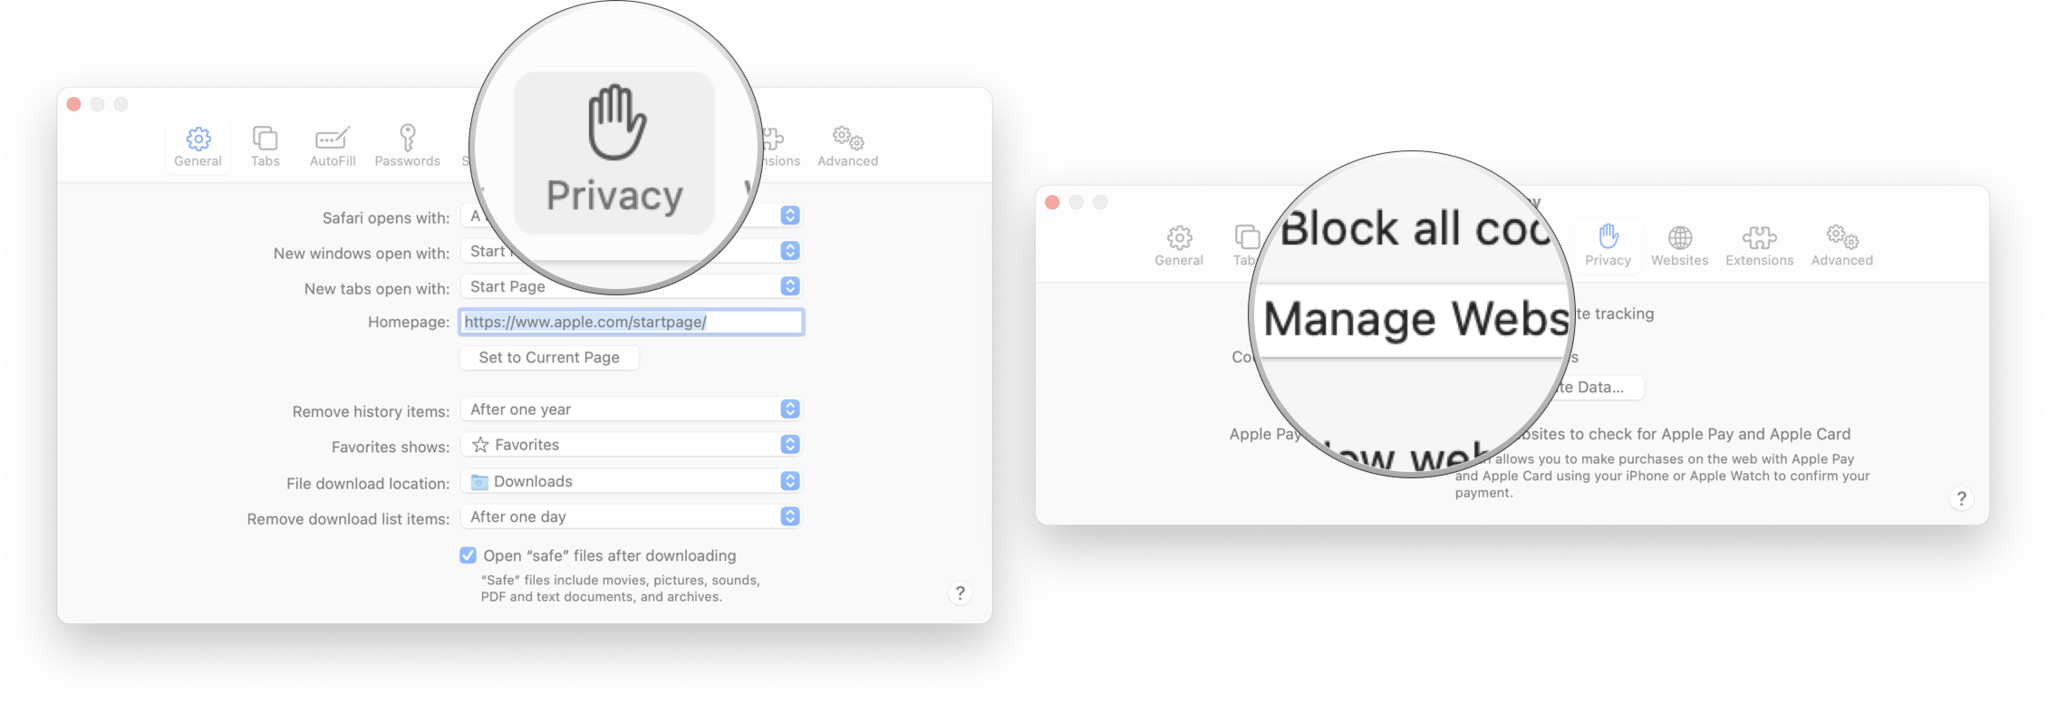 Clear Website Data From Safari On Mac: Click Privacy and then click Manage Website Data